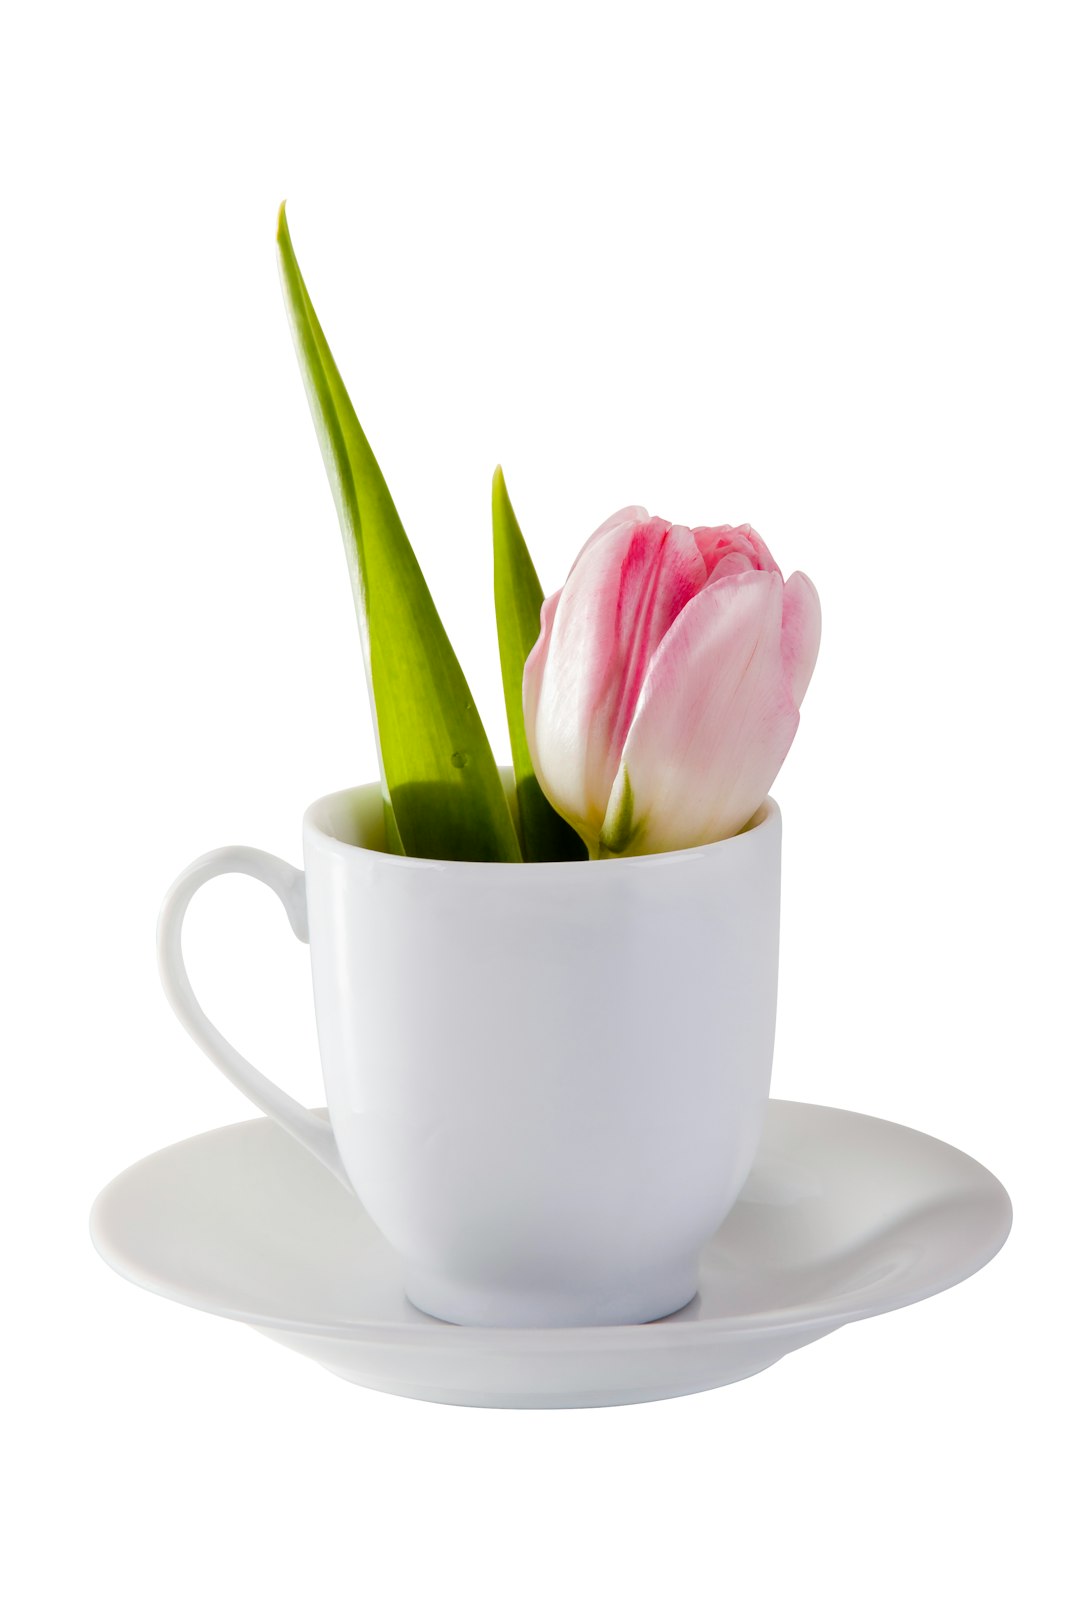 pink and white tulips in white ceramic teacup